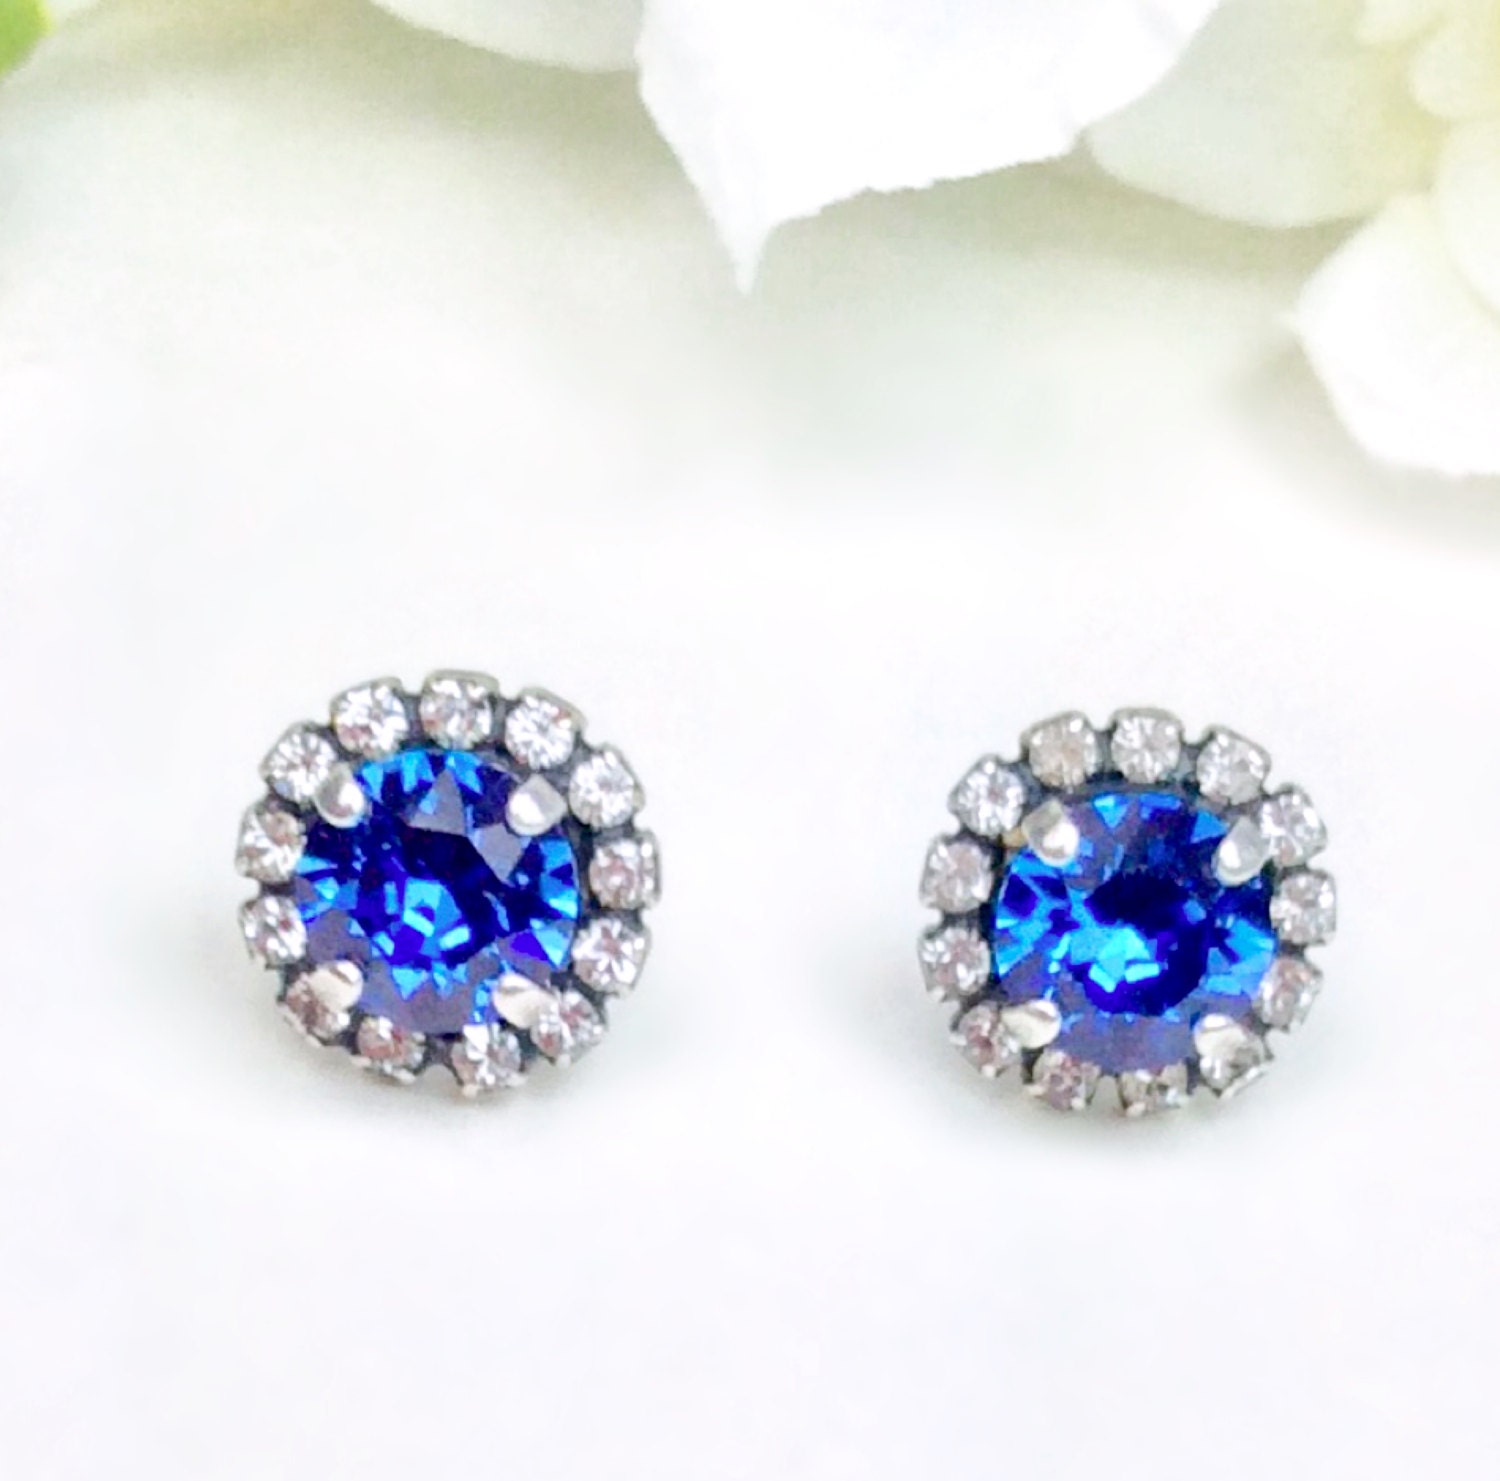 Swarovski Crystal 8.5mm Stud Earrings with Swarovski Crystal Halo -Very Classy - Sapphire - OR Choose Your Favorite Color  -  FREE SHIPPING